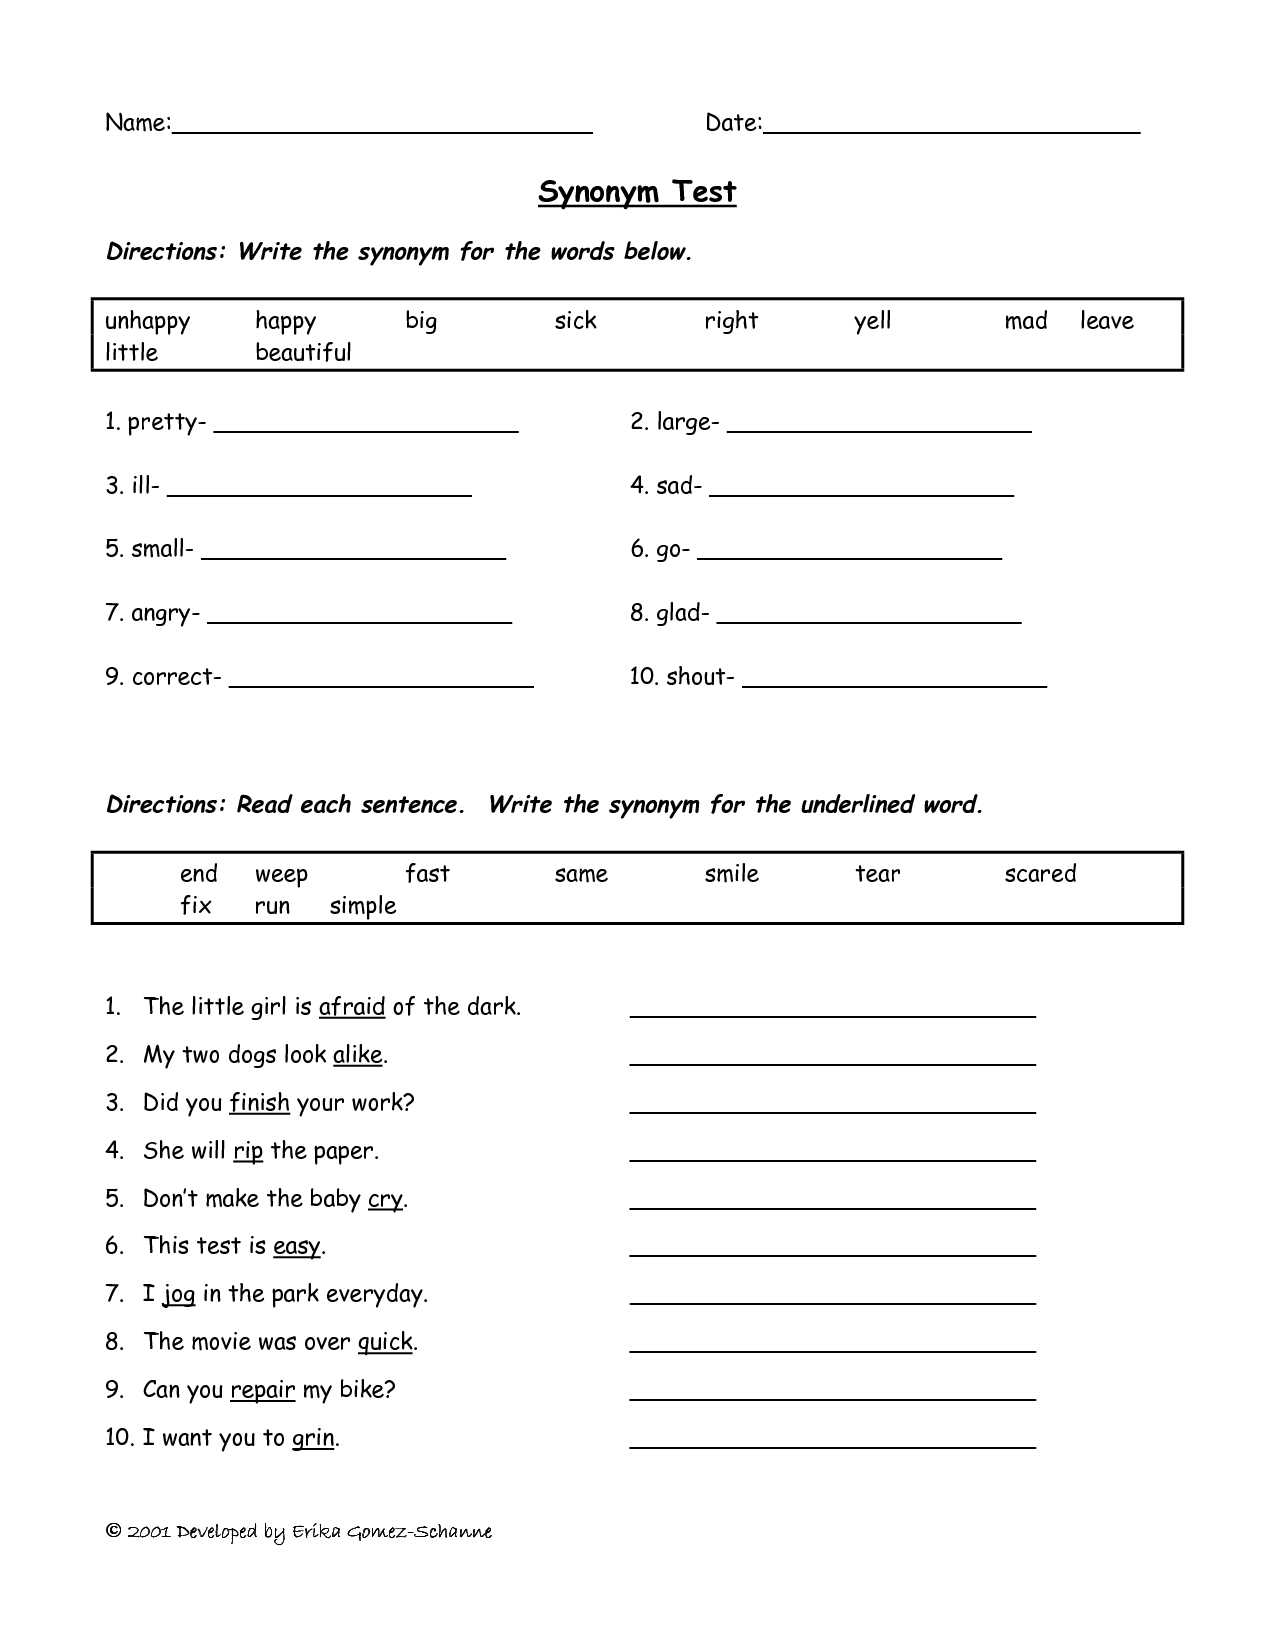 13 Best Images of Analogies Worksheets Synonyms And Antonyms - Synonyms